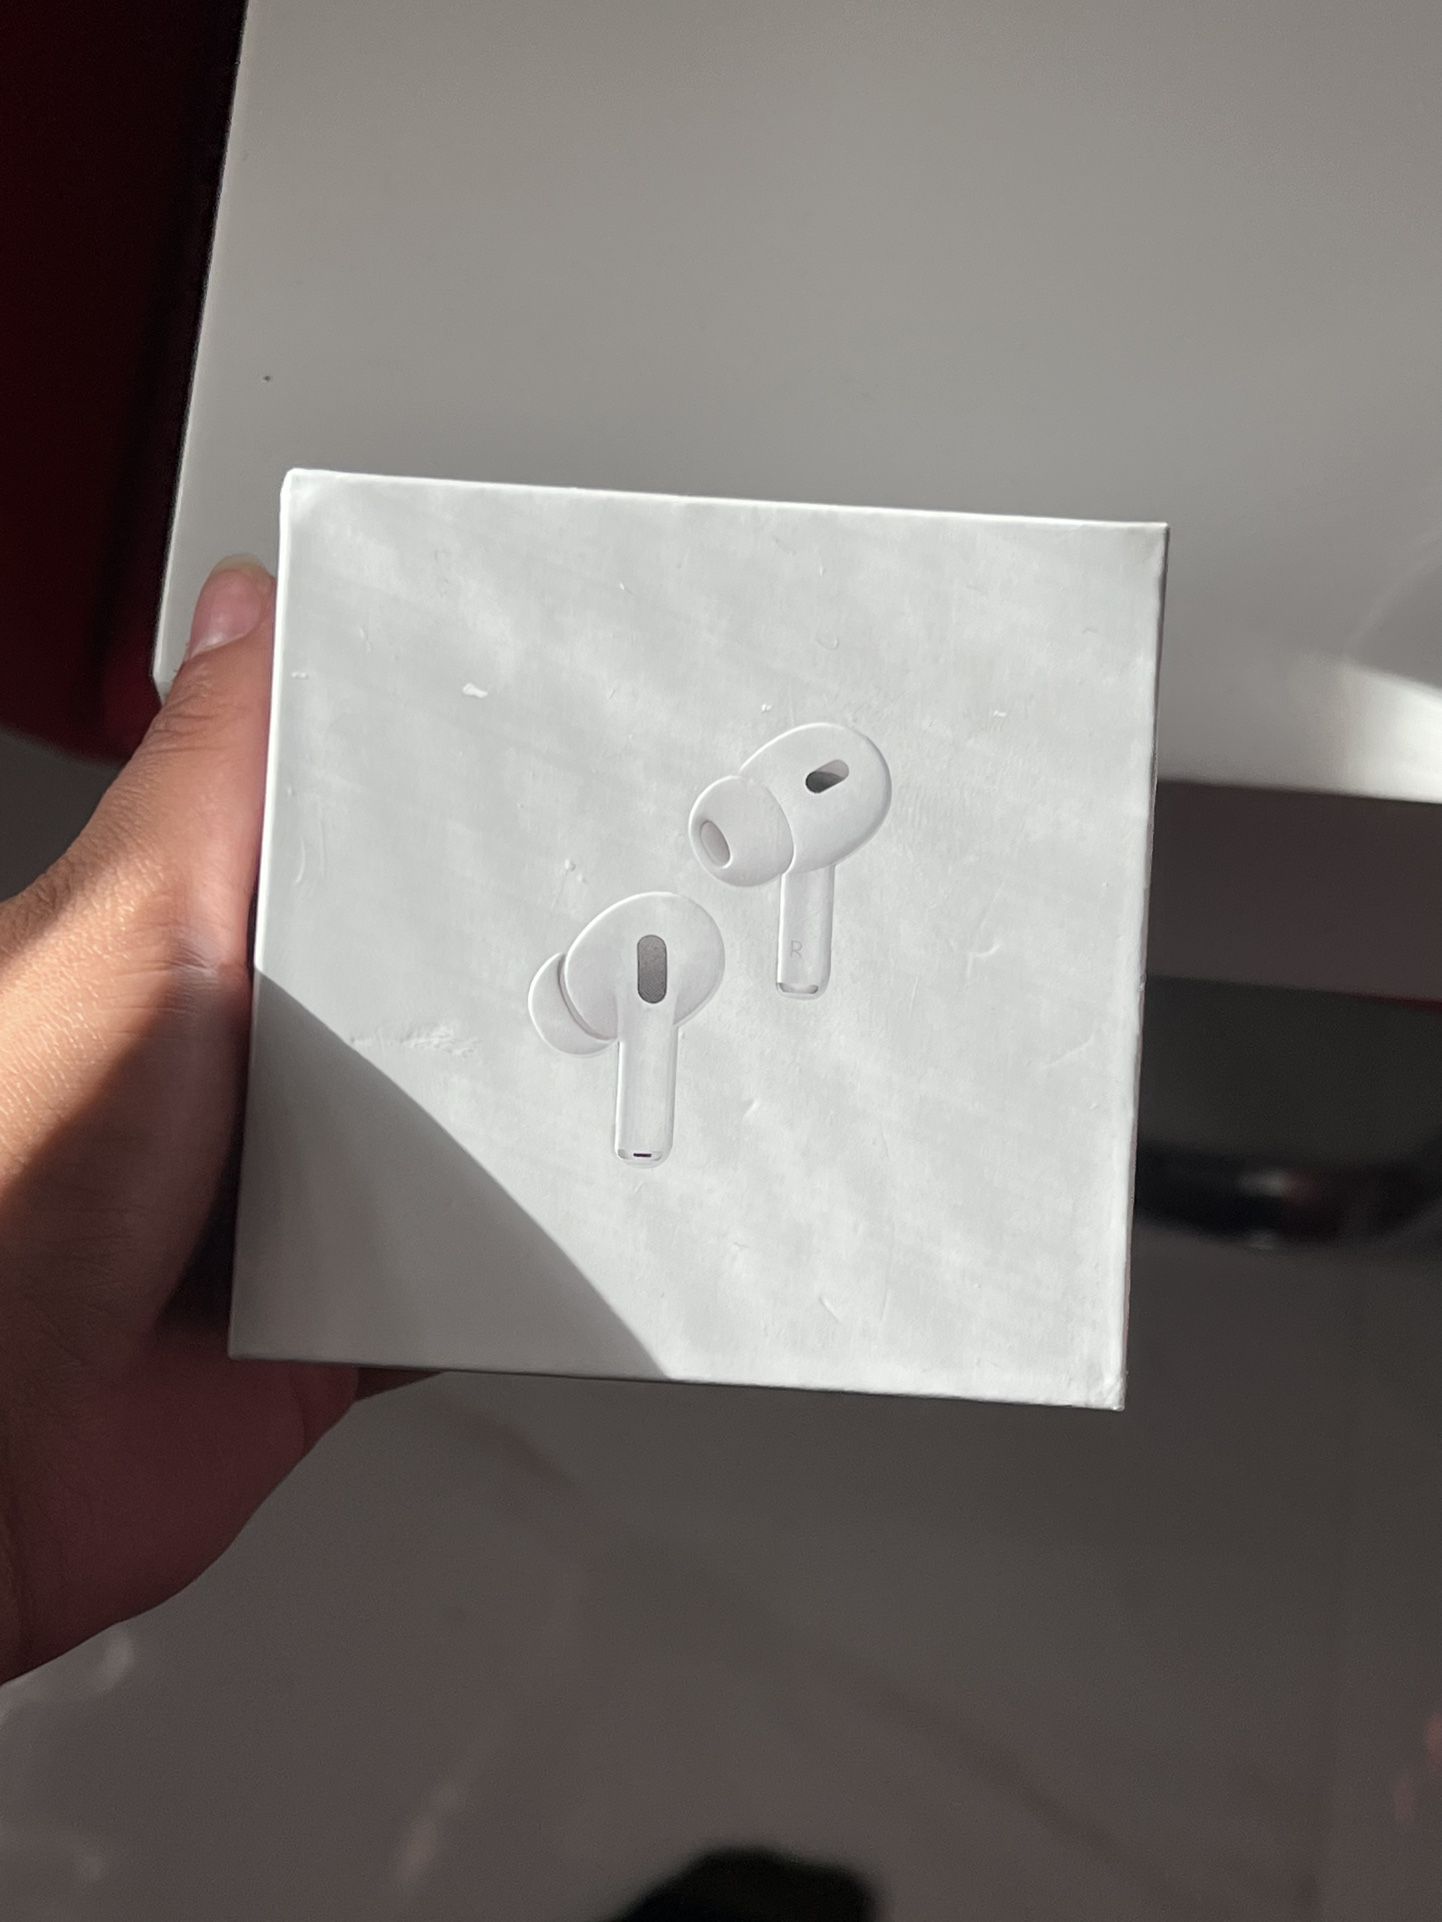 Apple airpods pro second generation